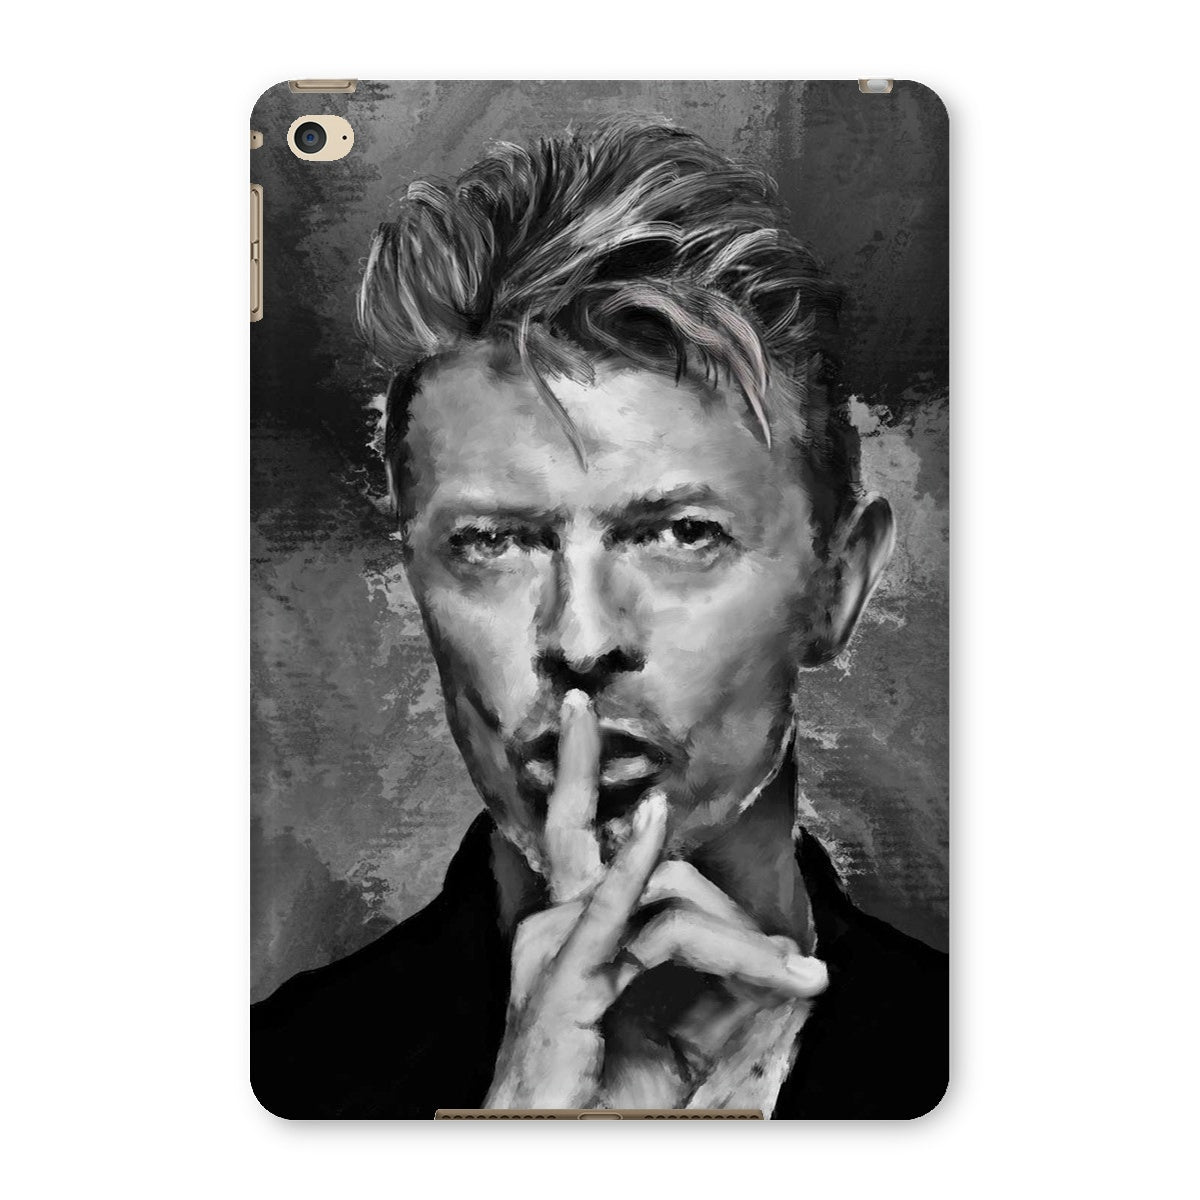 Bowie 'Shhh!' Painting Tablet Cases